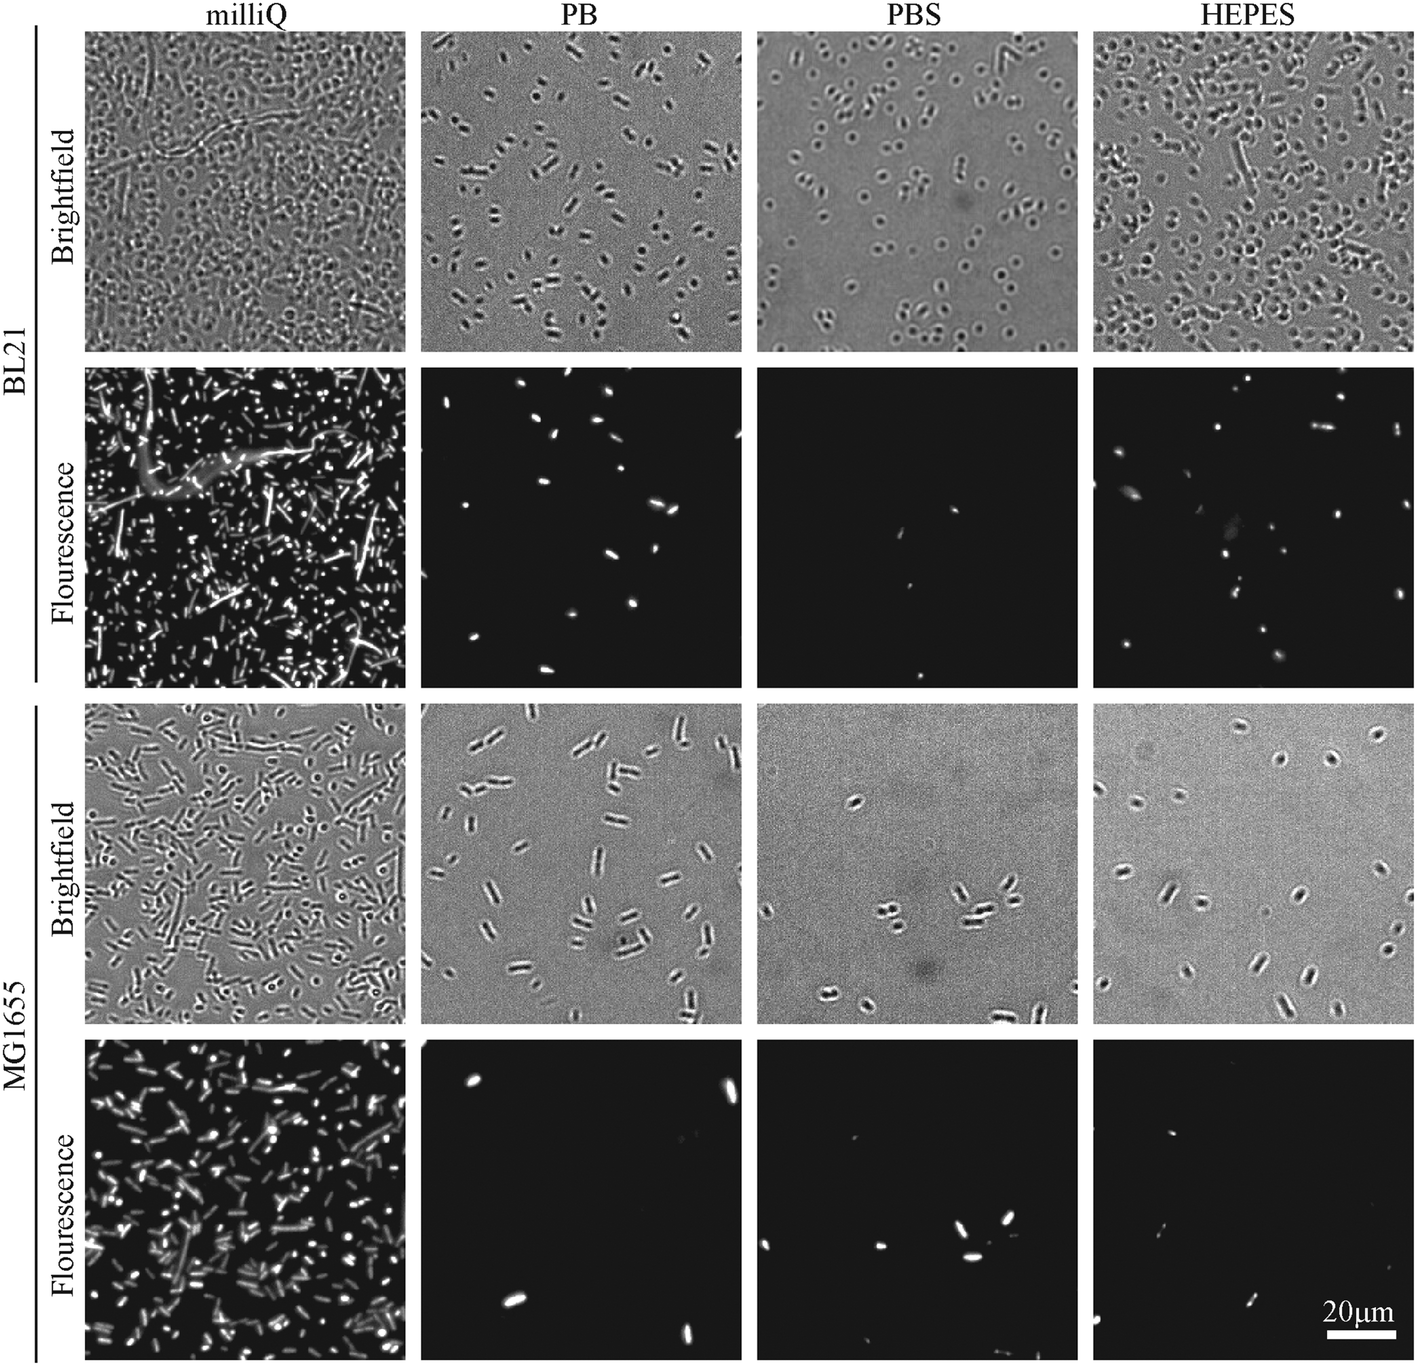 Imaging Live Bacteria At The Nanoscale Comparison Of Immobilisation Strategies Analyst Rsc Publishing Doi 10 1039 C9and